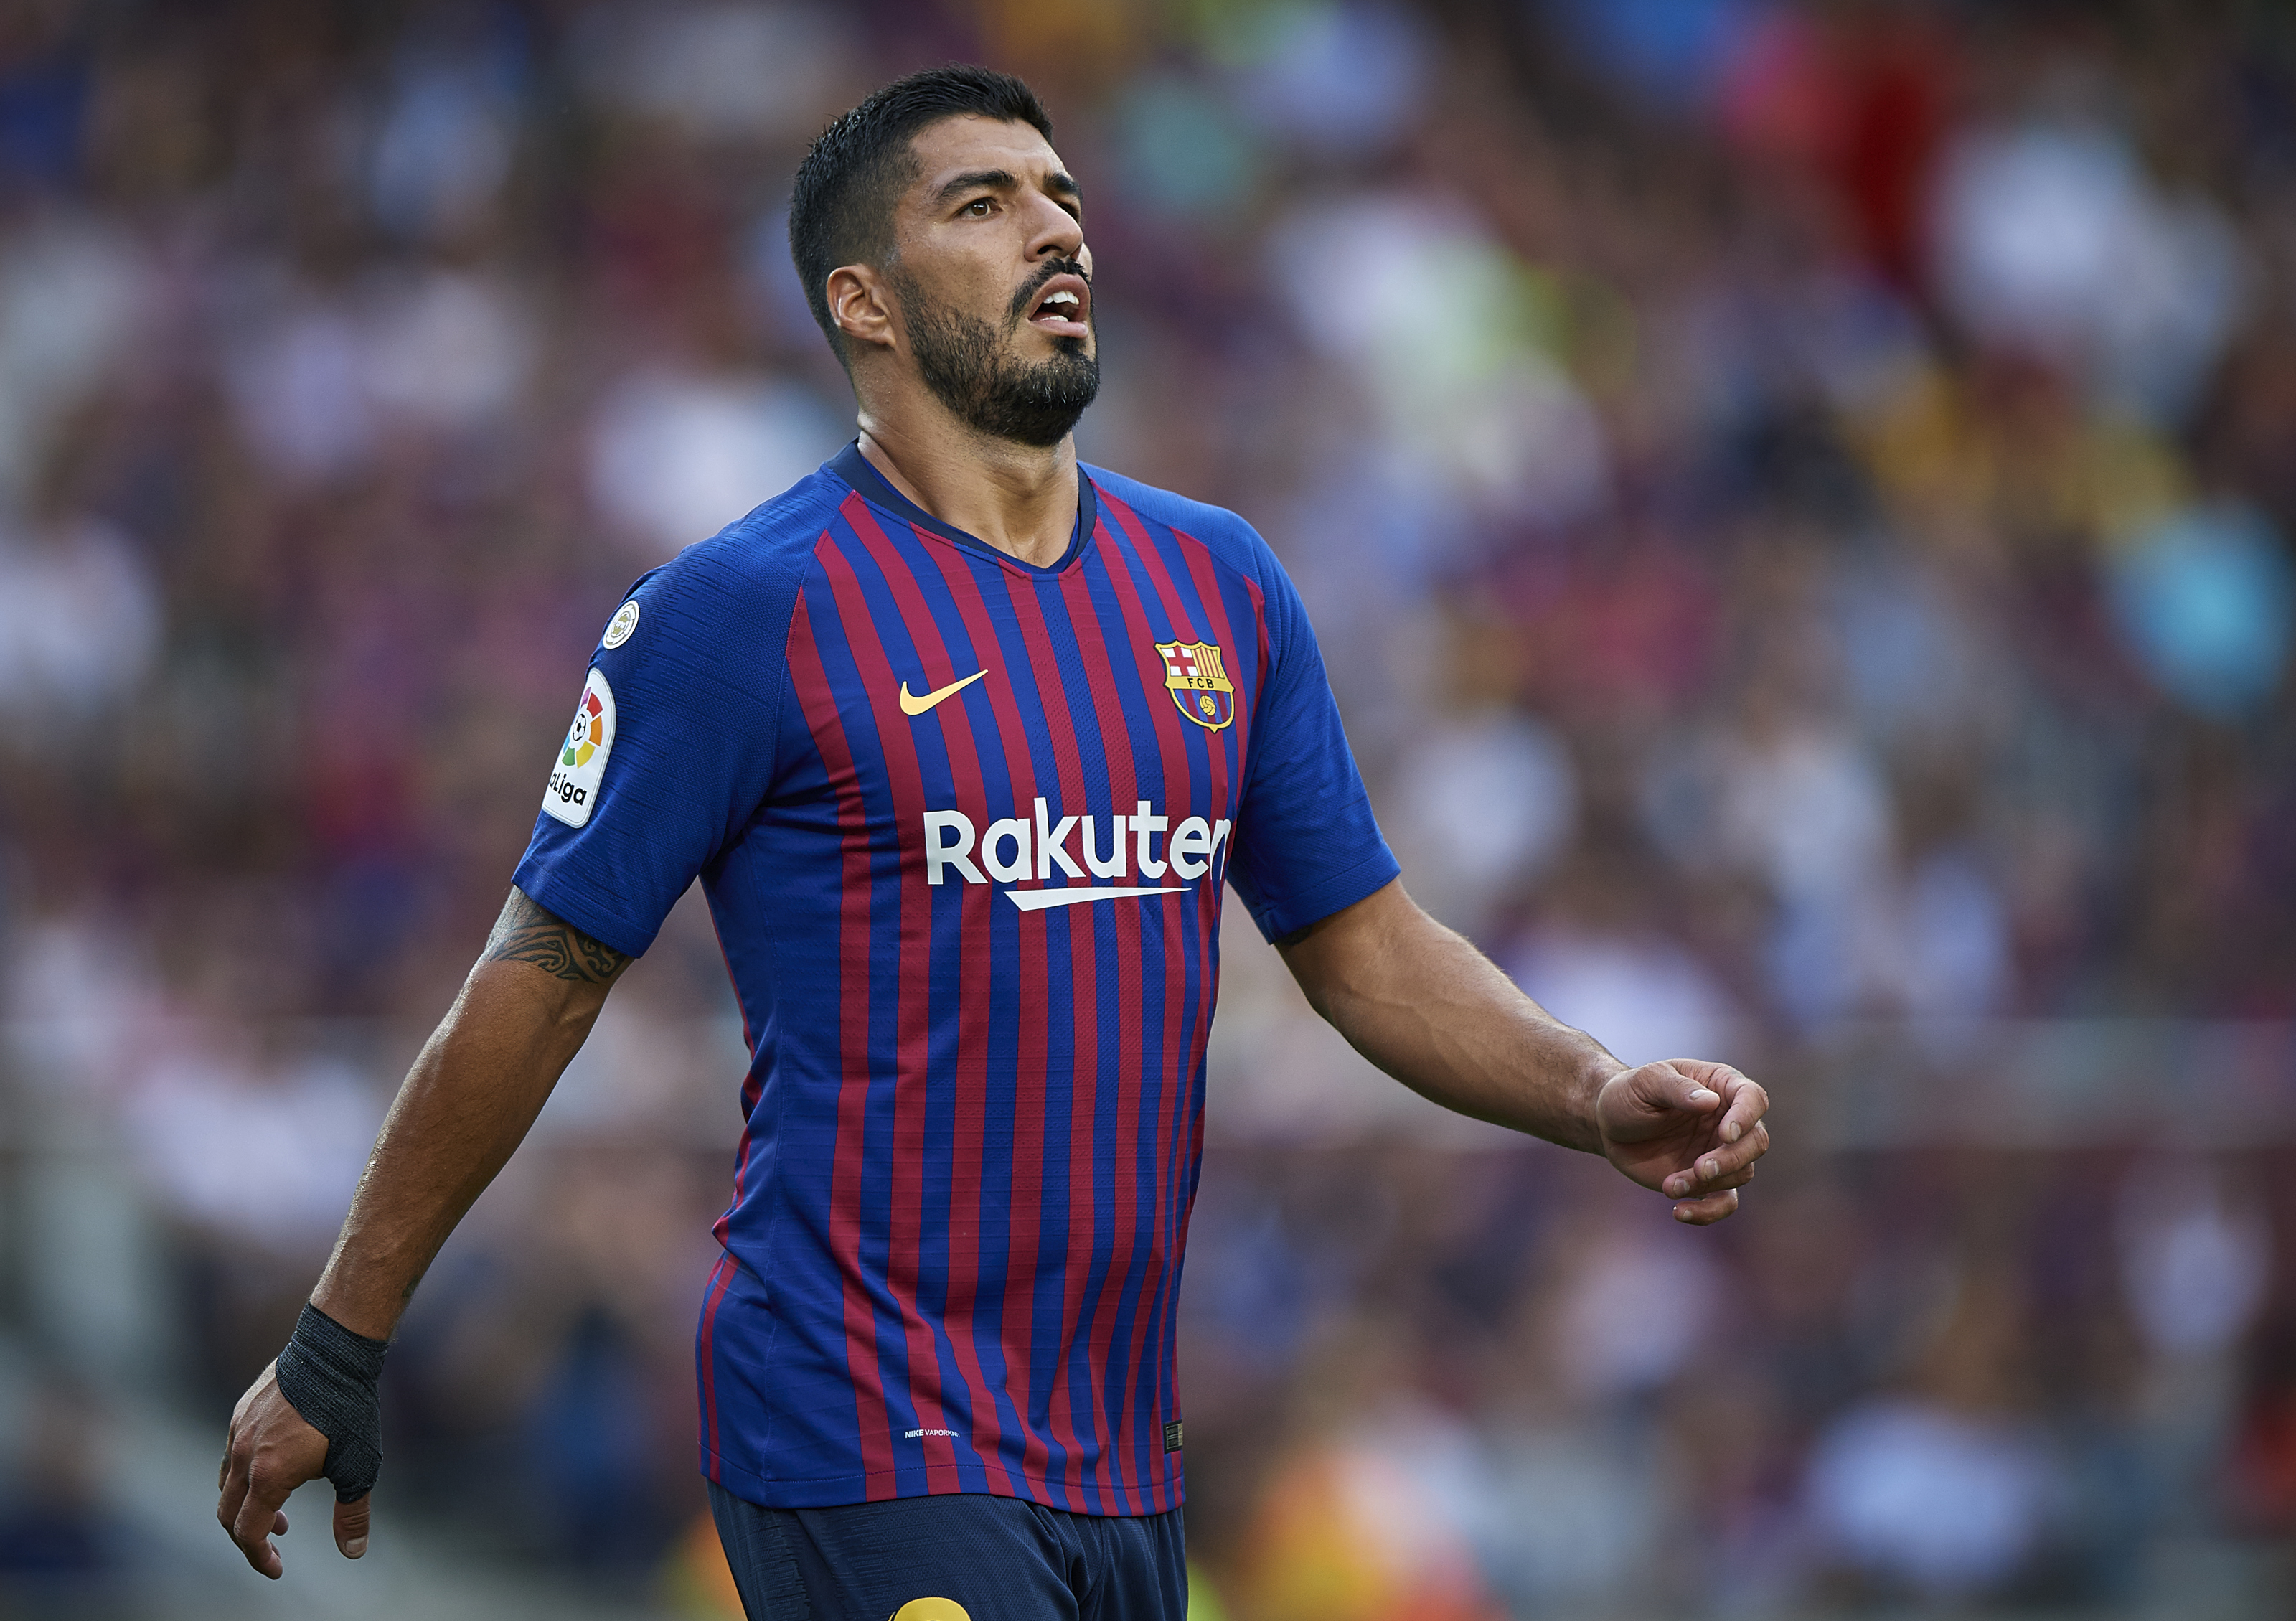 Luis Suarez was sold by Barcelona against Lionel Messi's wishes